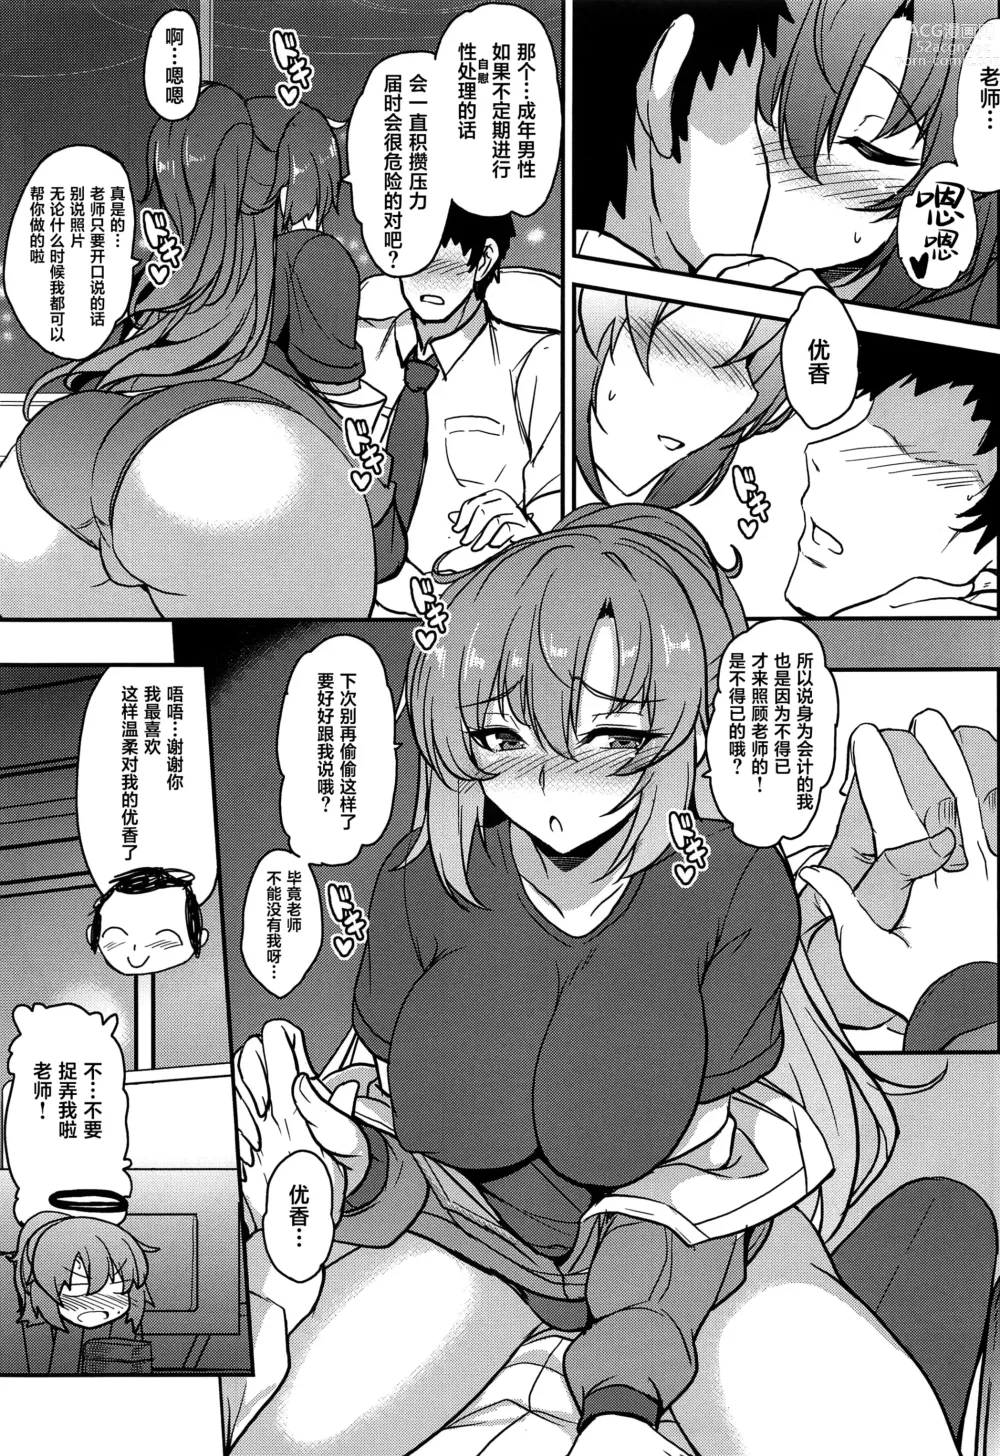 Page 7 of doujinshi Blue Passion shell